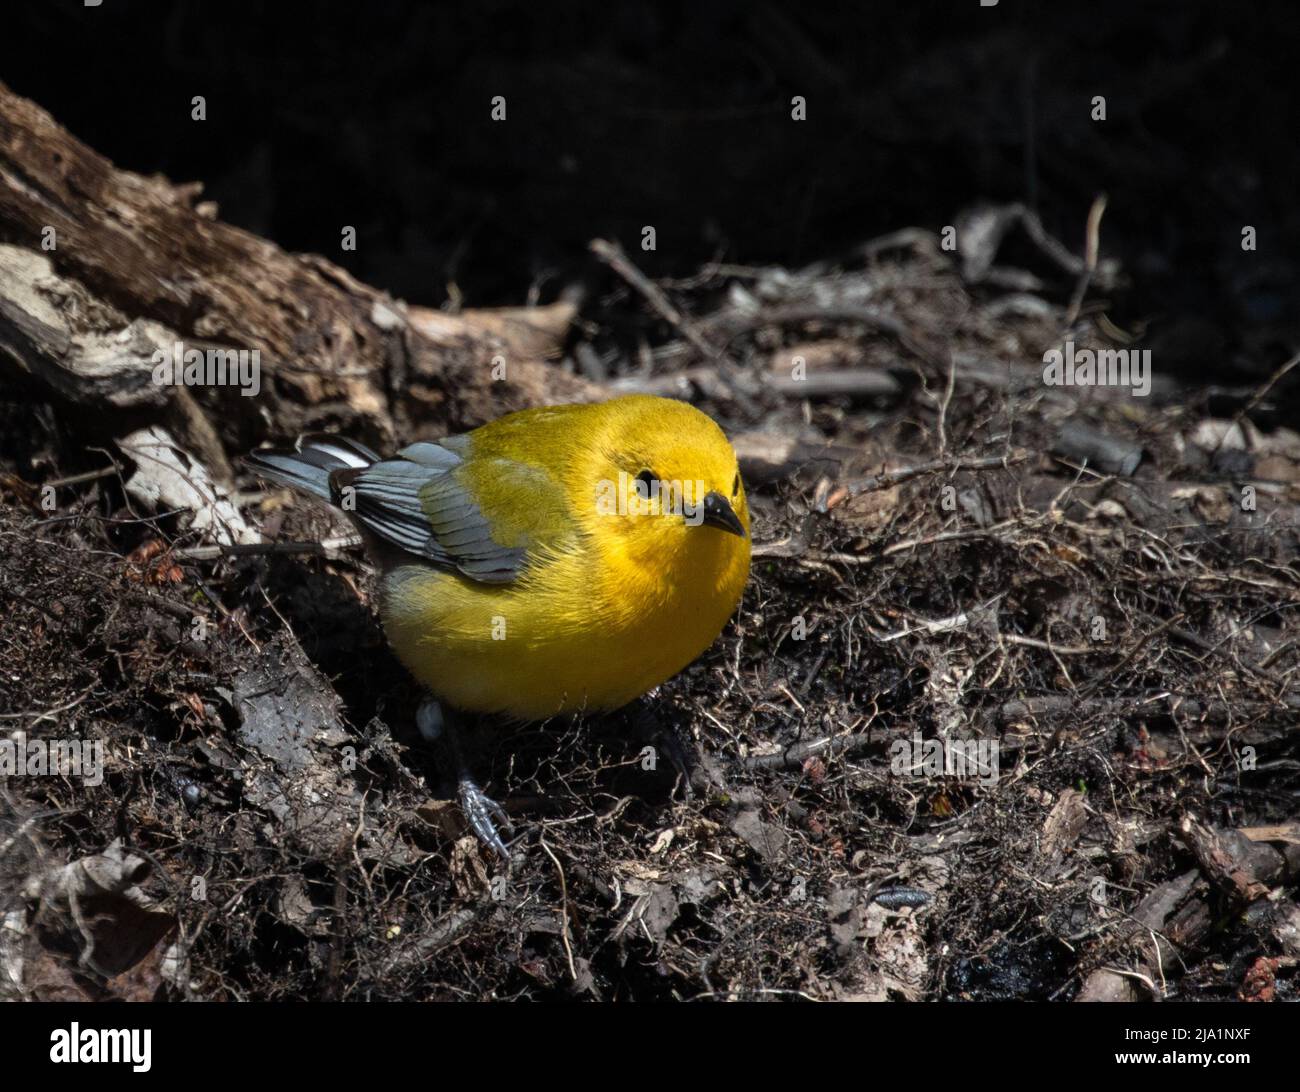 A Prothonotary Warbler closeup in a swamp environment at Pelee Ontario Stock Photo